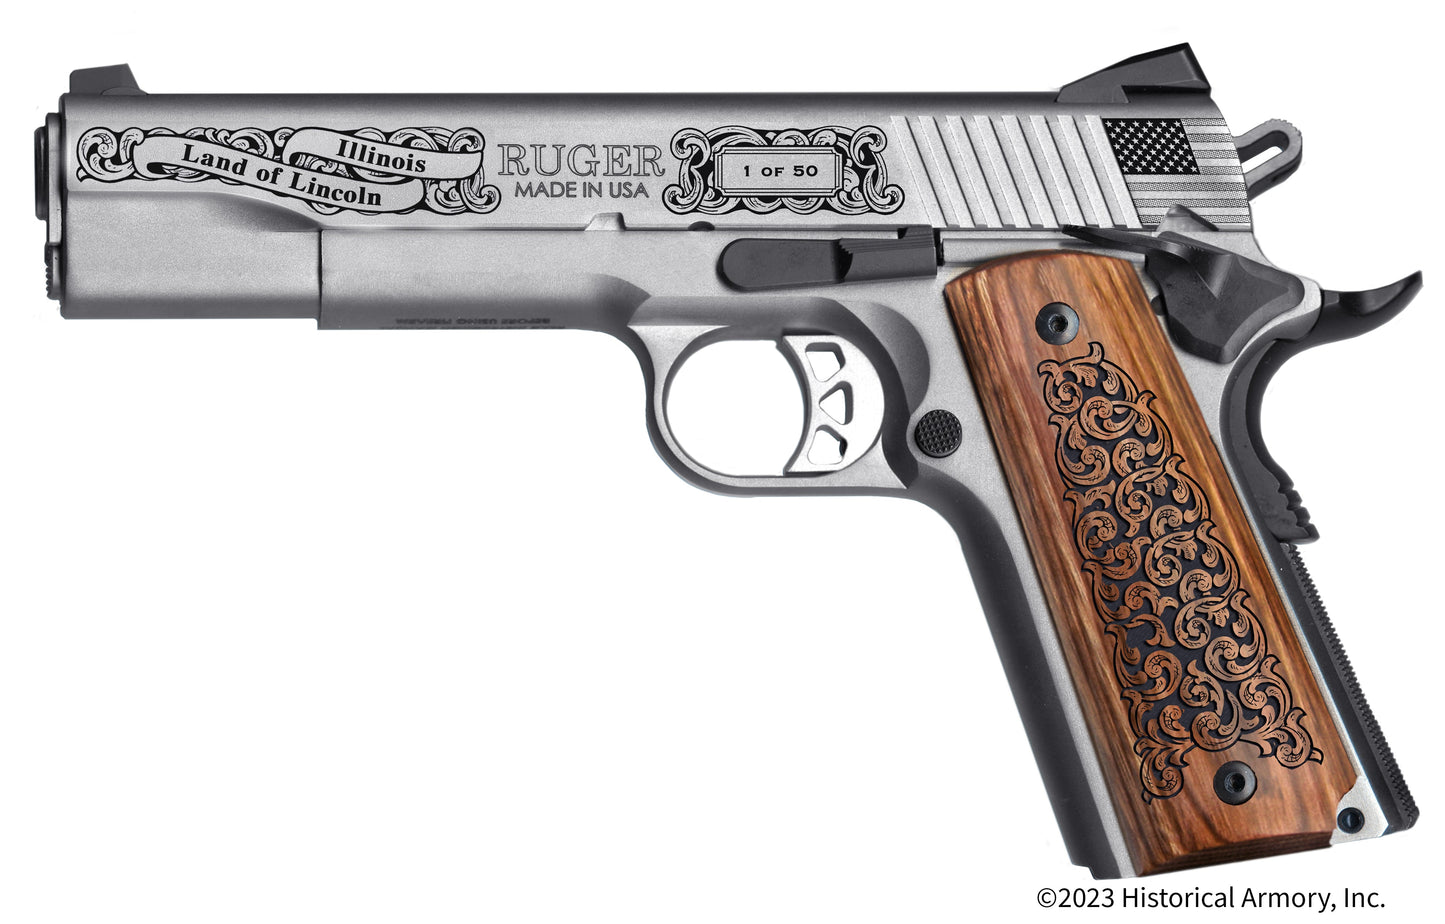 Coles County Illinois Engraved .45 Auto Ruger 1911